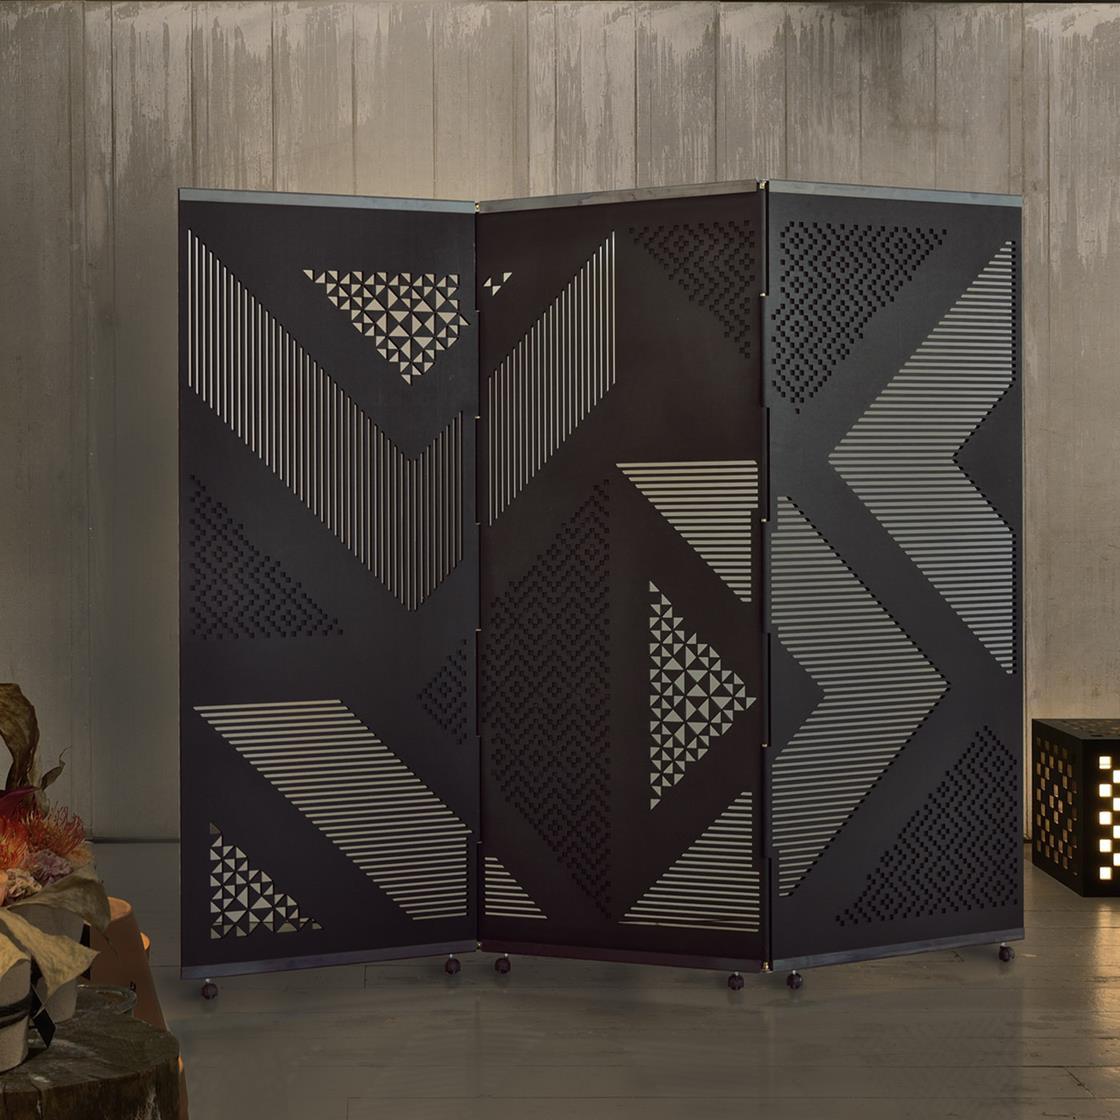 Pantographed motives from Sardinian textile tradition lend this room divider its iconic character. Fashioned of MDF and stained in black, the design will be a clever and classy solution in modern decors that will enhance intimacy while not